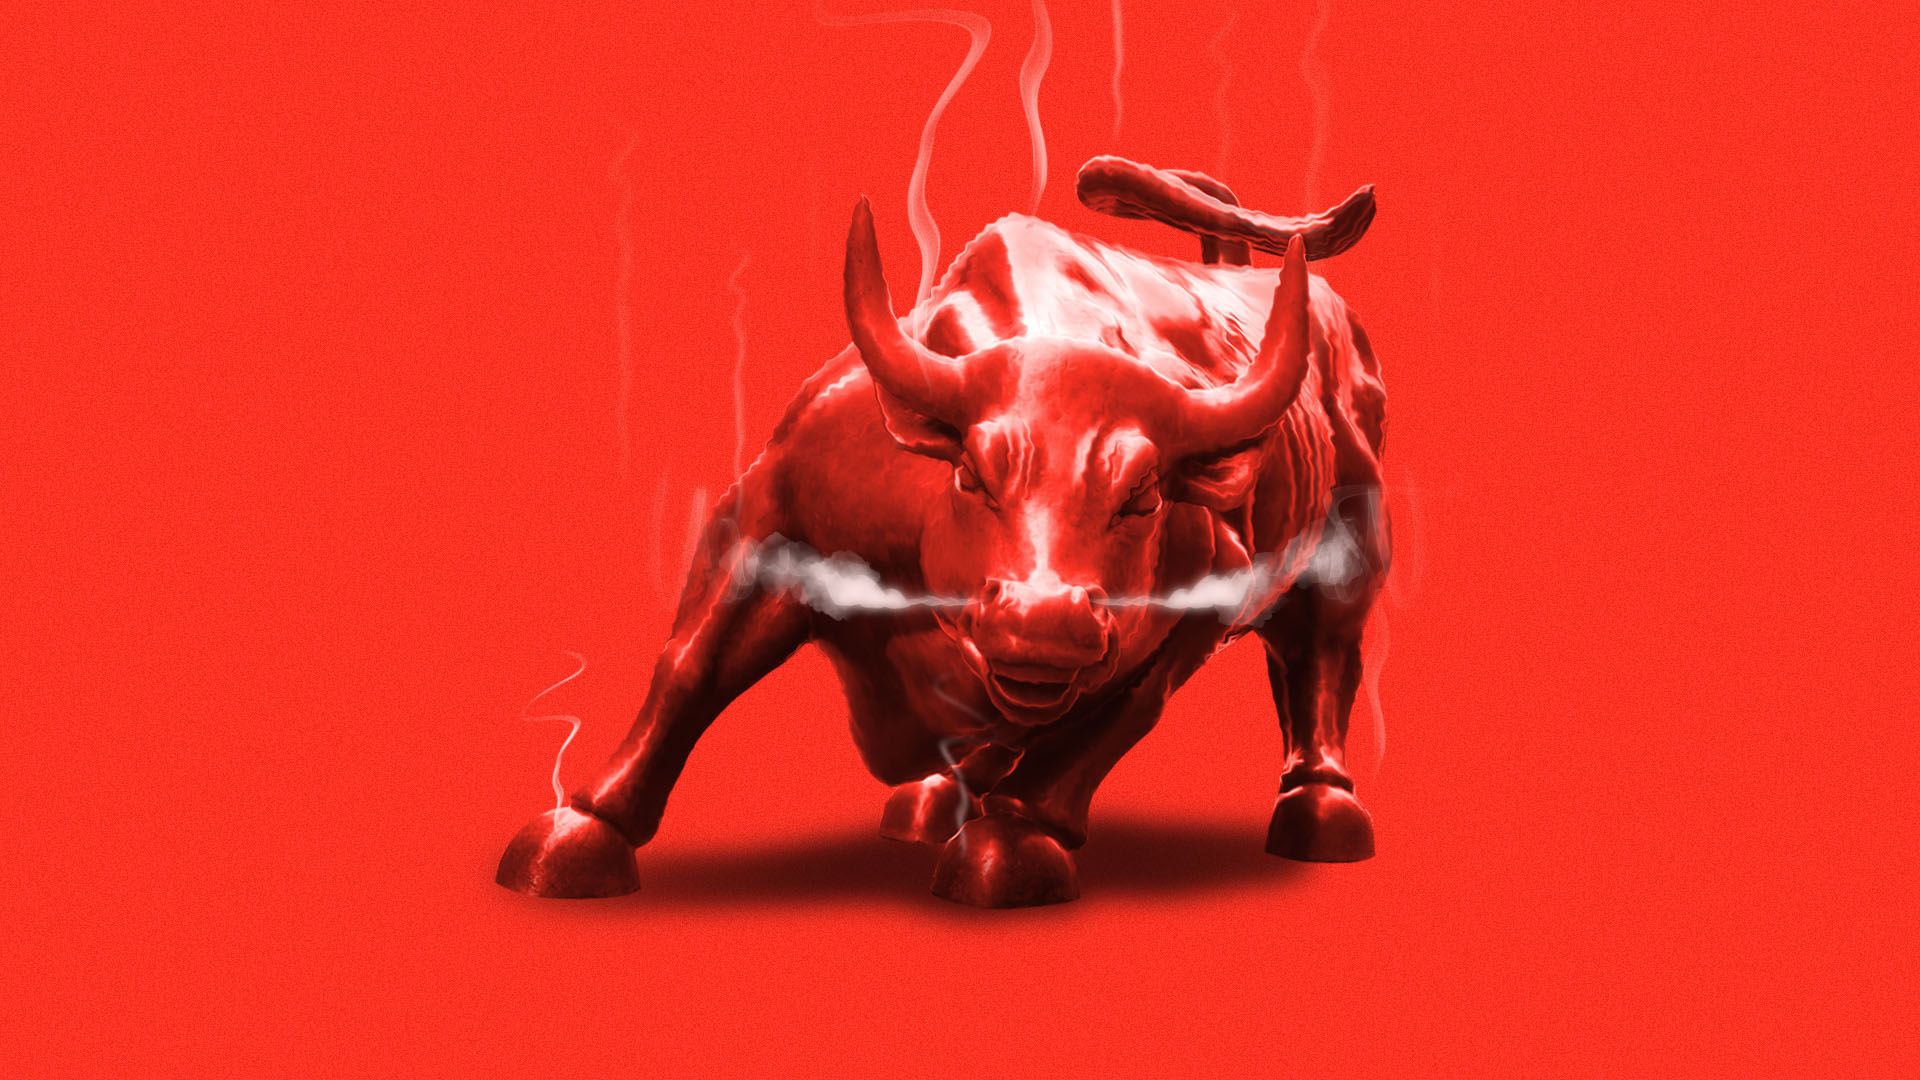 lllustration of the Wall Street bull with steam coming off of him